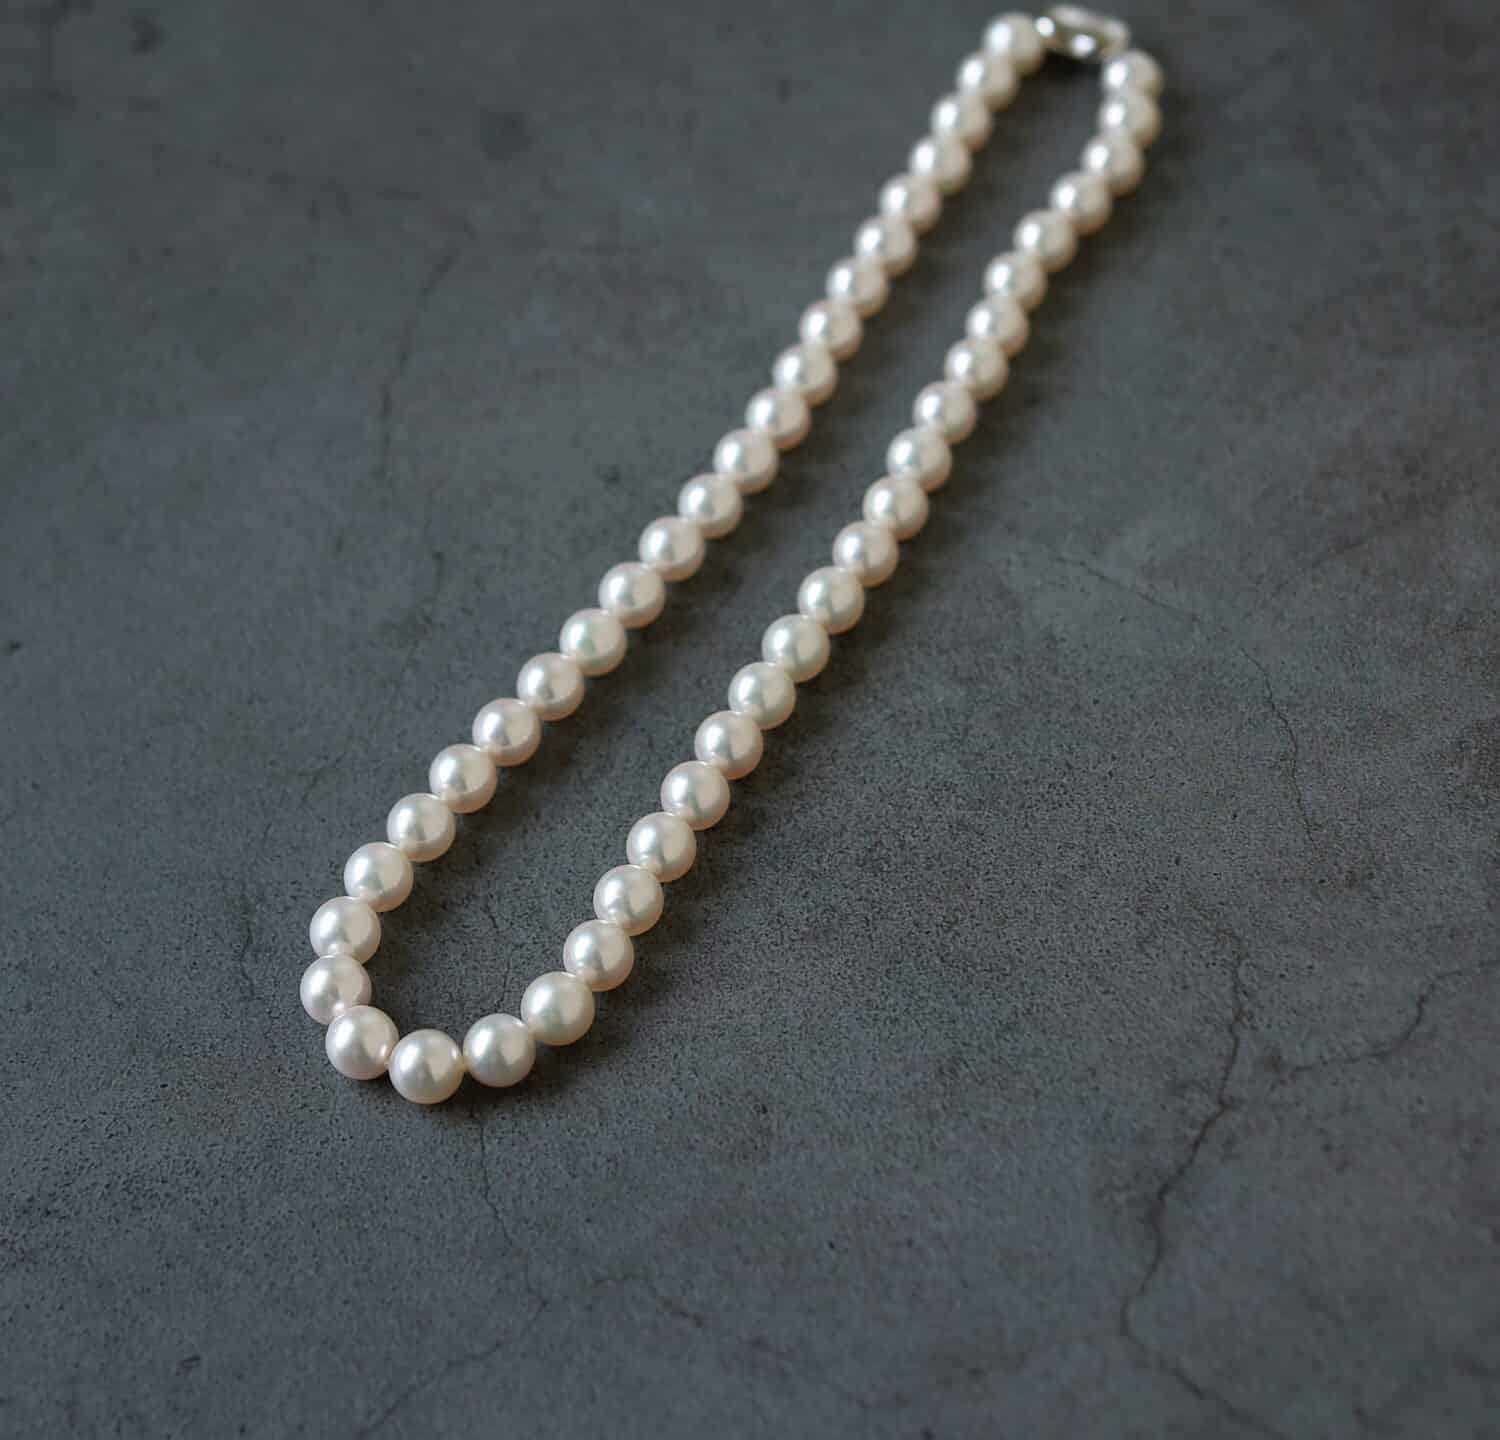 Authentic Akoya pearl necklace on rocky background